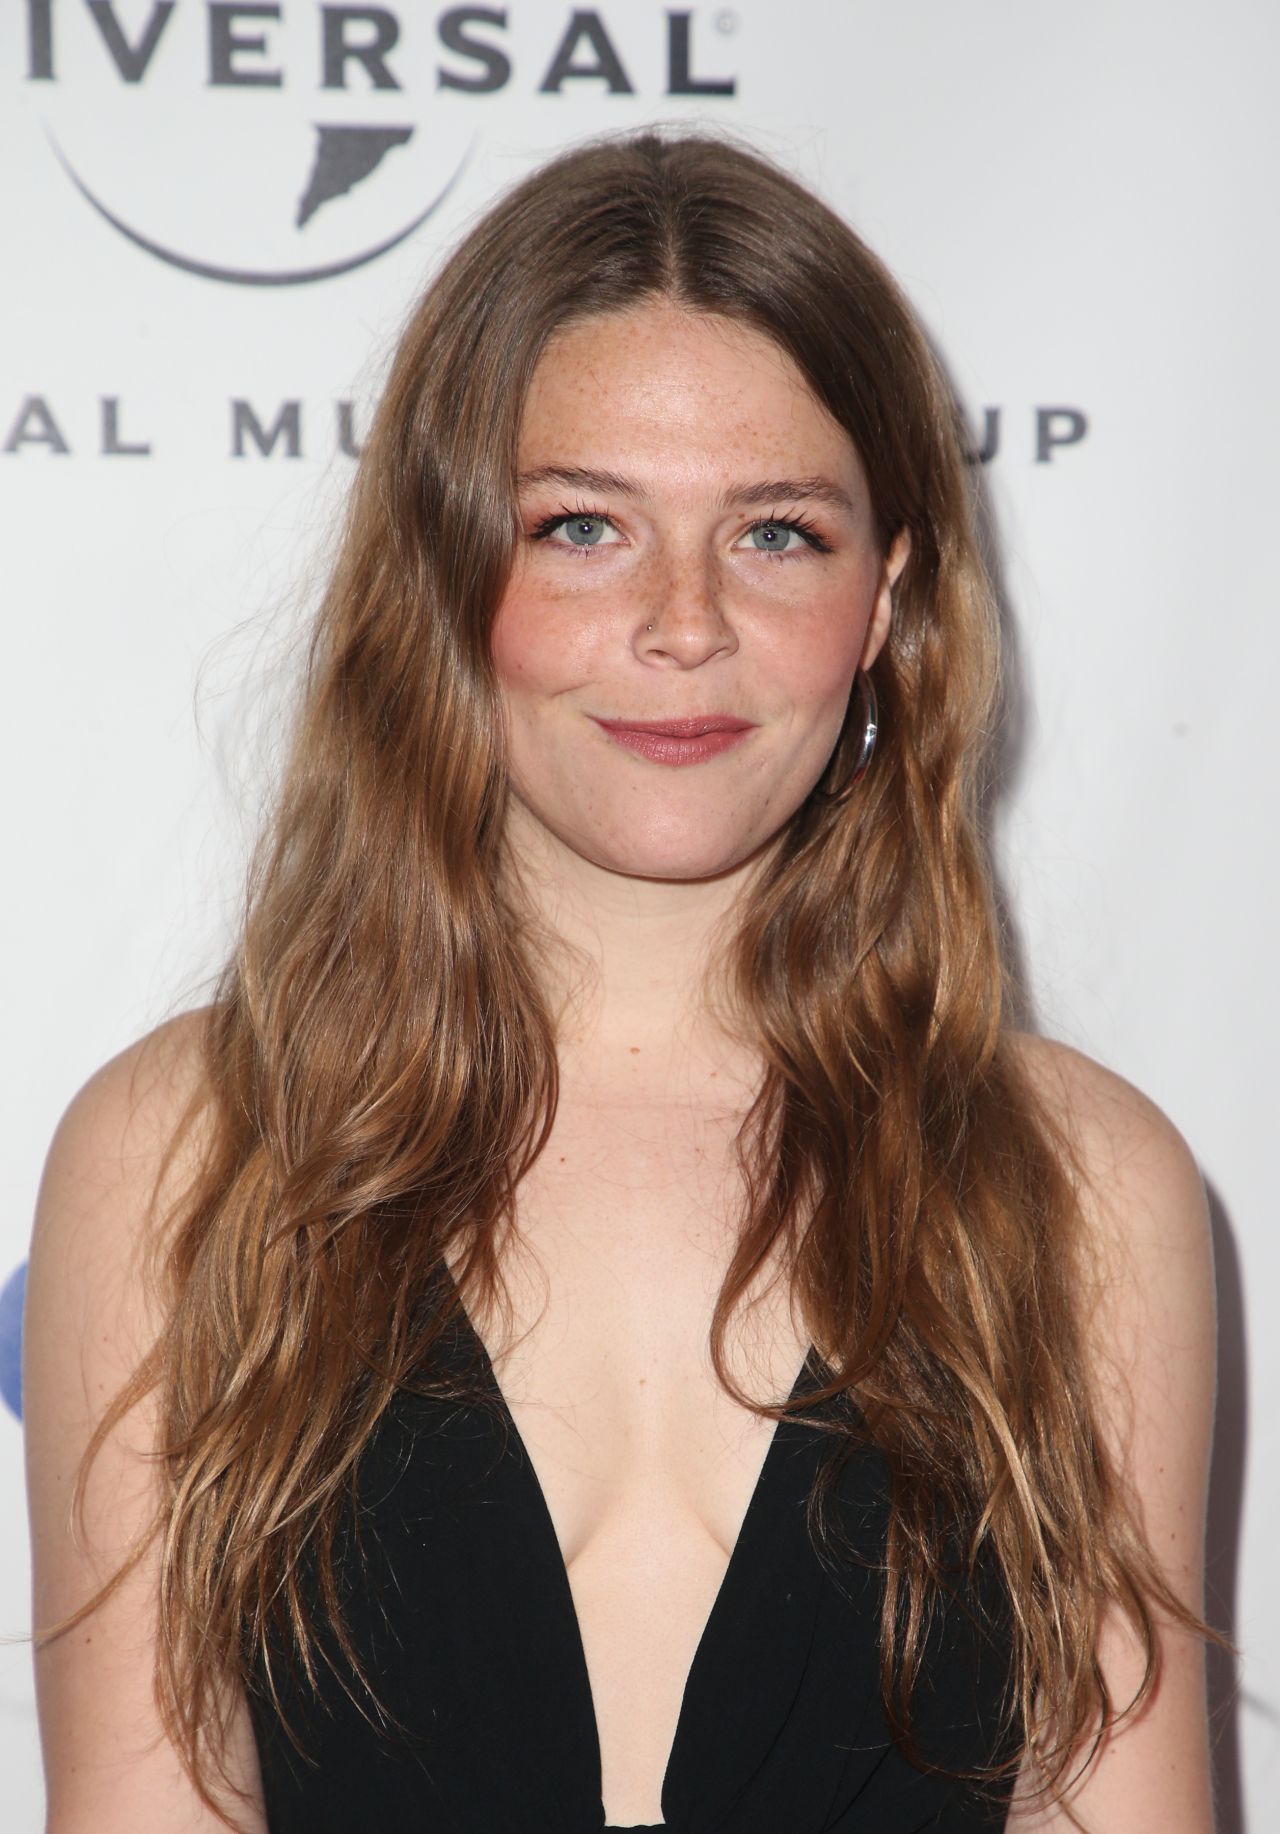 maggie-rogers-universal-music-group-grammy-after-party-02-10-2019-5.jpg